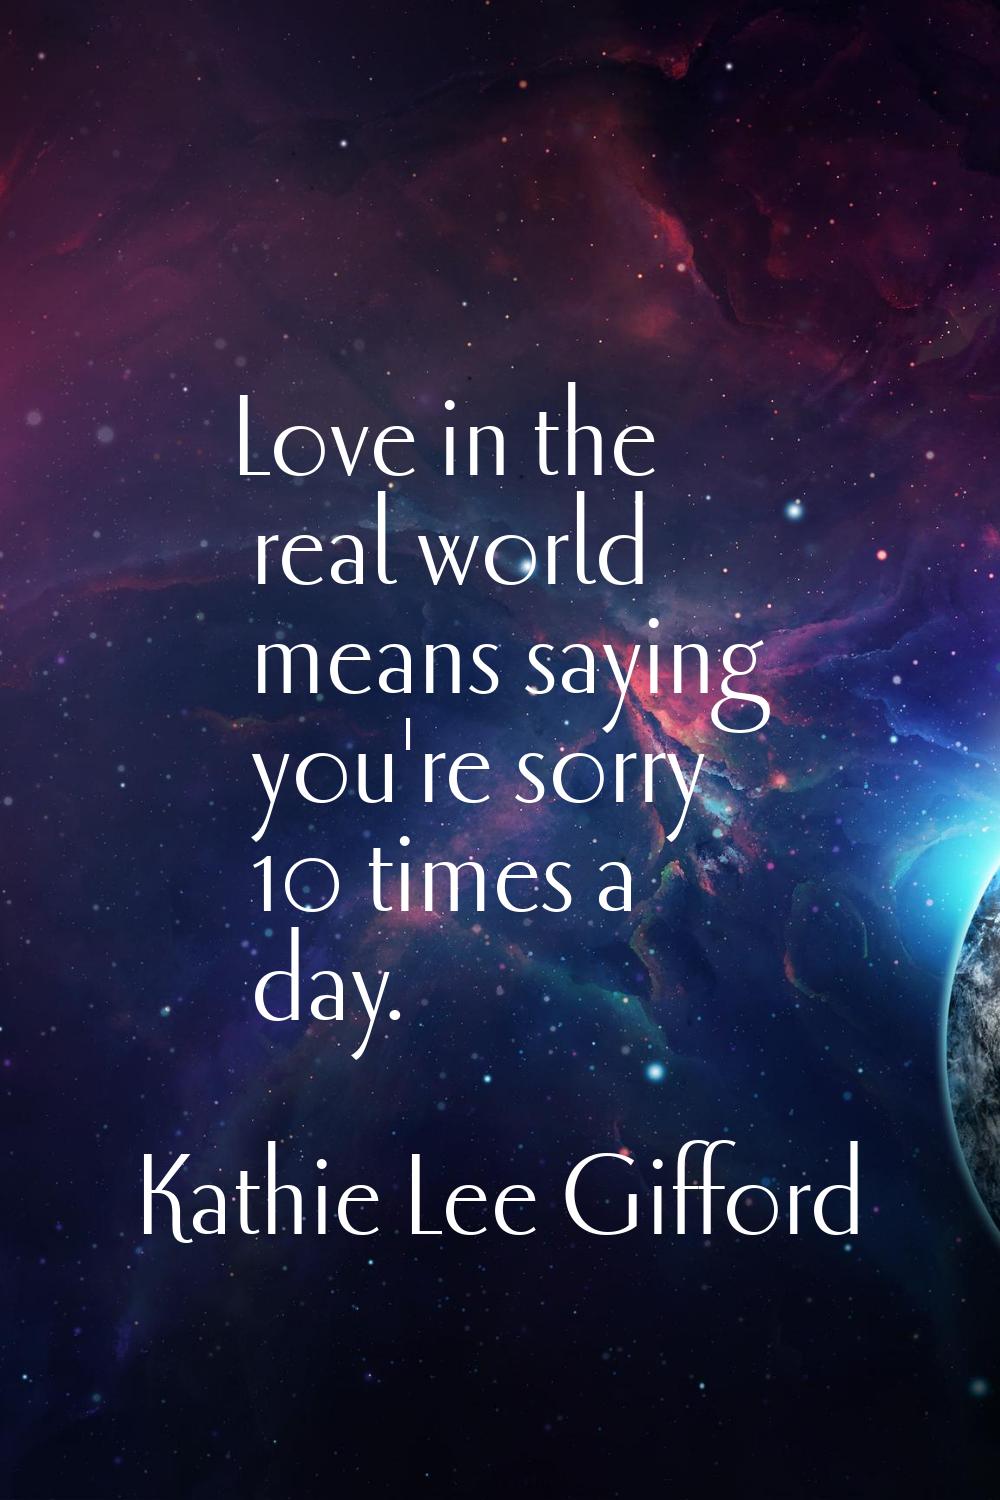 Love in the real world means saying you're sorry 10 times a day.